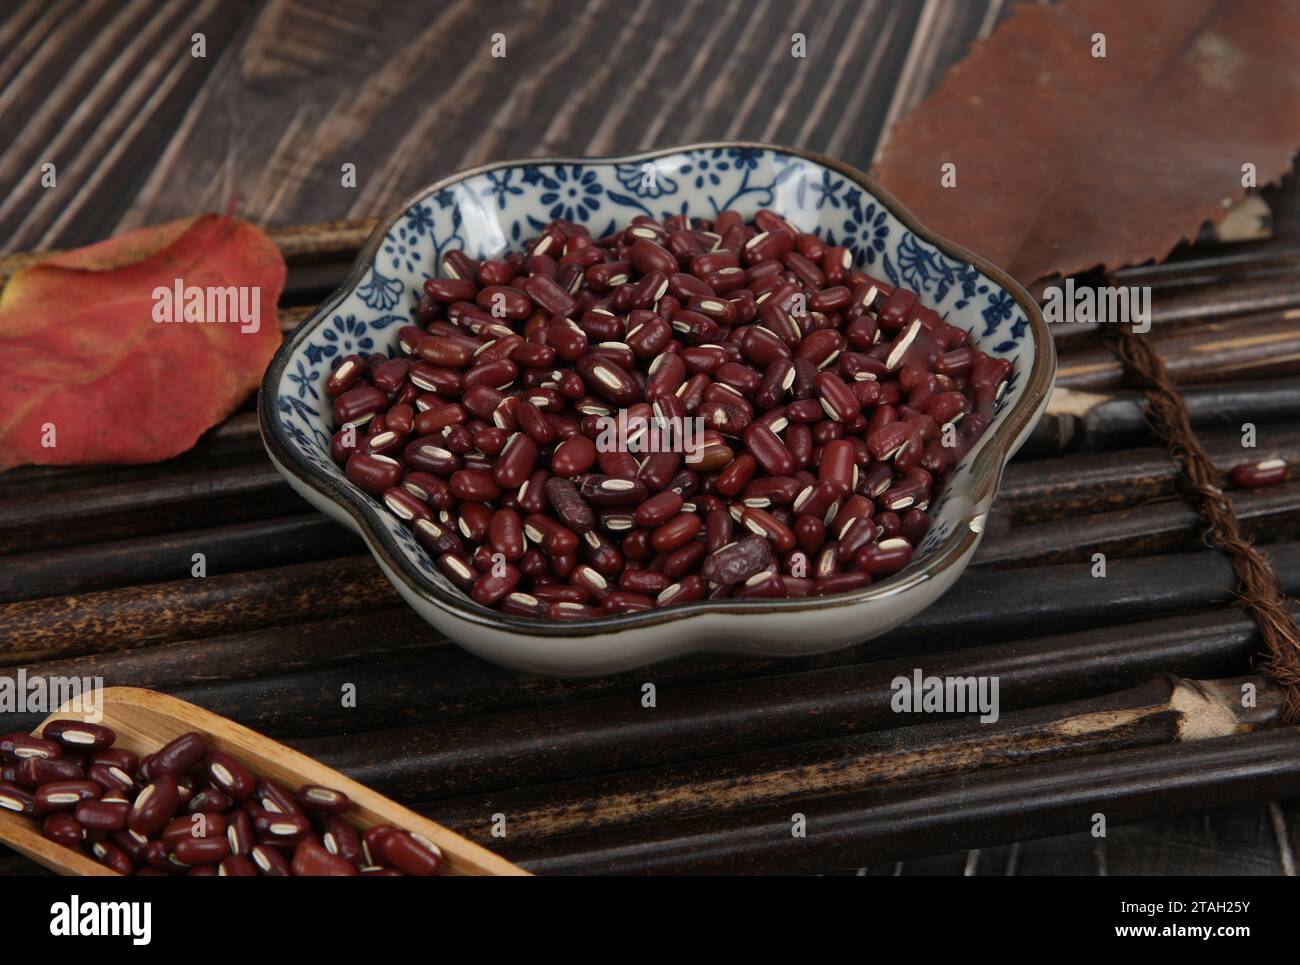 Pictures of red beans, red beans for diet, vegetarian food, high quality photos Stock Photo